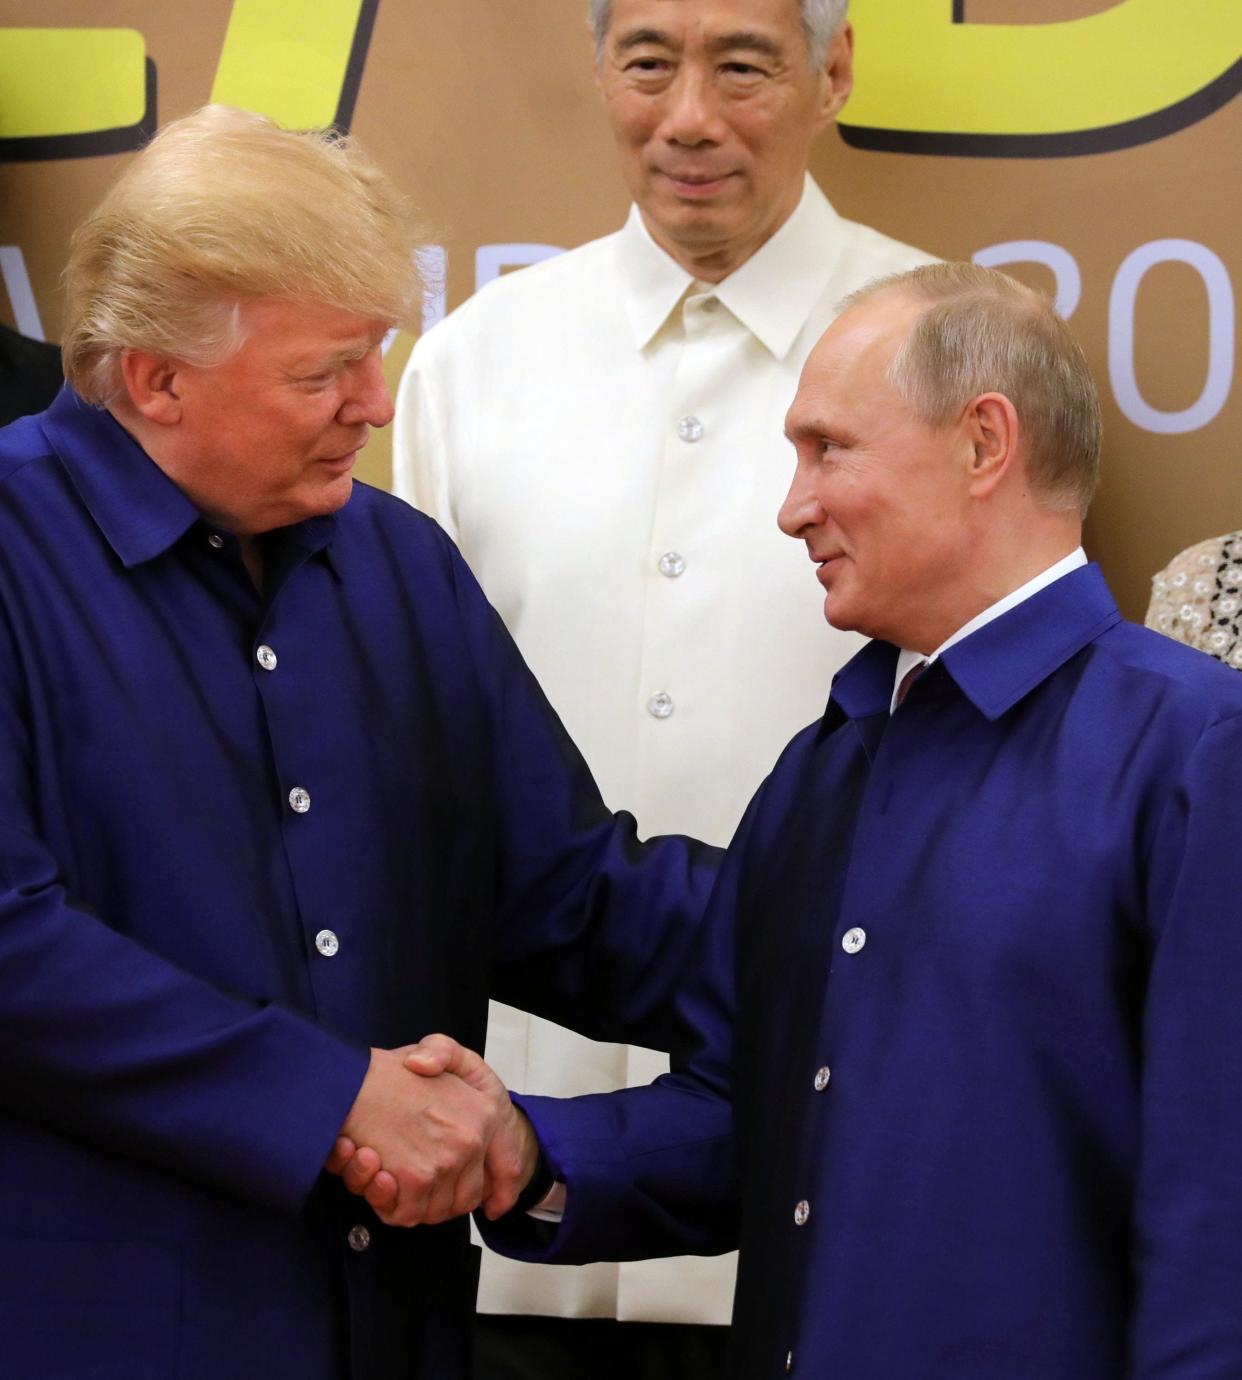 US President Donald Trump (L) shakes hands with Russia's President Vladimir Putin (R) as they pose for a group photo ahead of the Asia-Pacific Economic Cooperation (APEC) Summit leaders gala dinner in the central Vietnamese city of Danang on November 10, 2017. / AFP PHOTO / SPUTNIK / Mikhail KLIMENTYEVMIKHAIL KLIMENTYEV/AFP/Getty Images